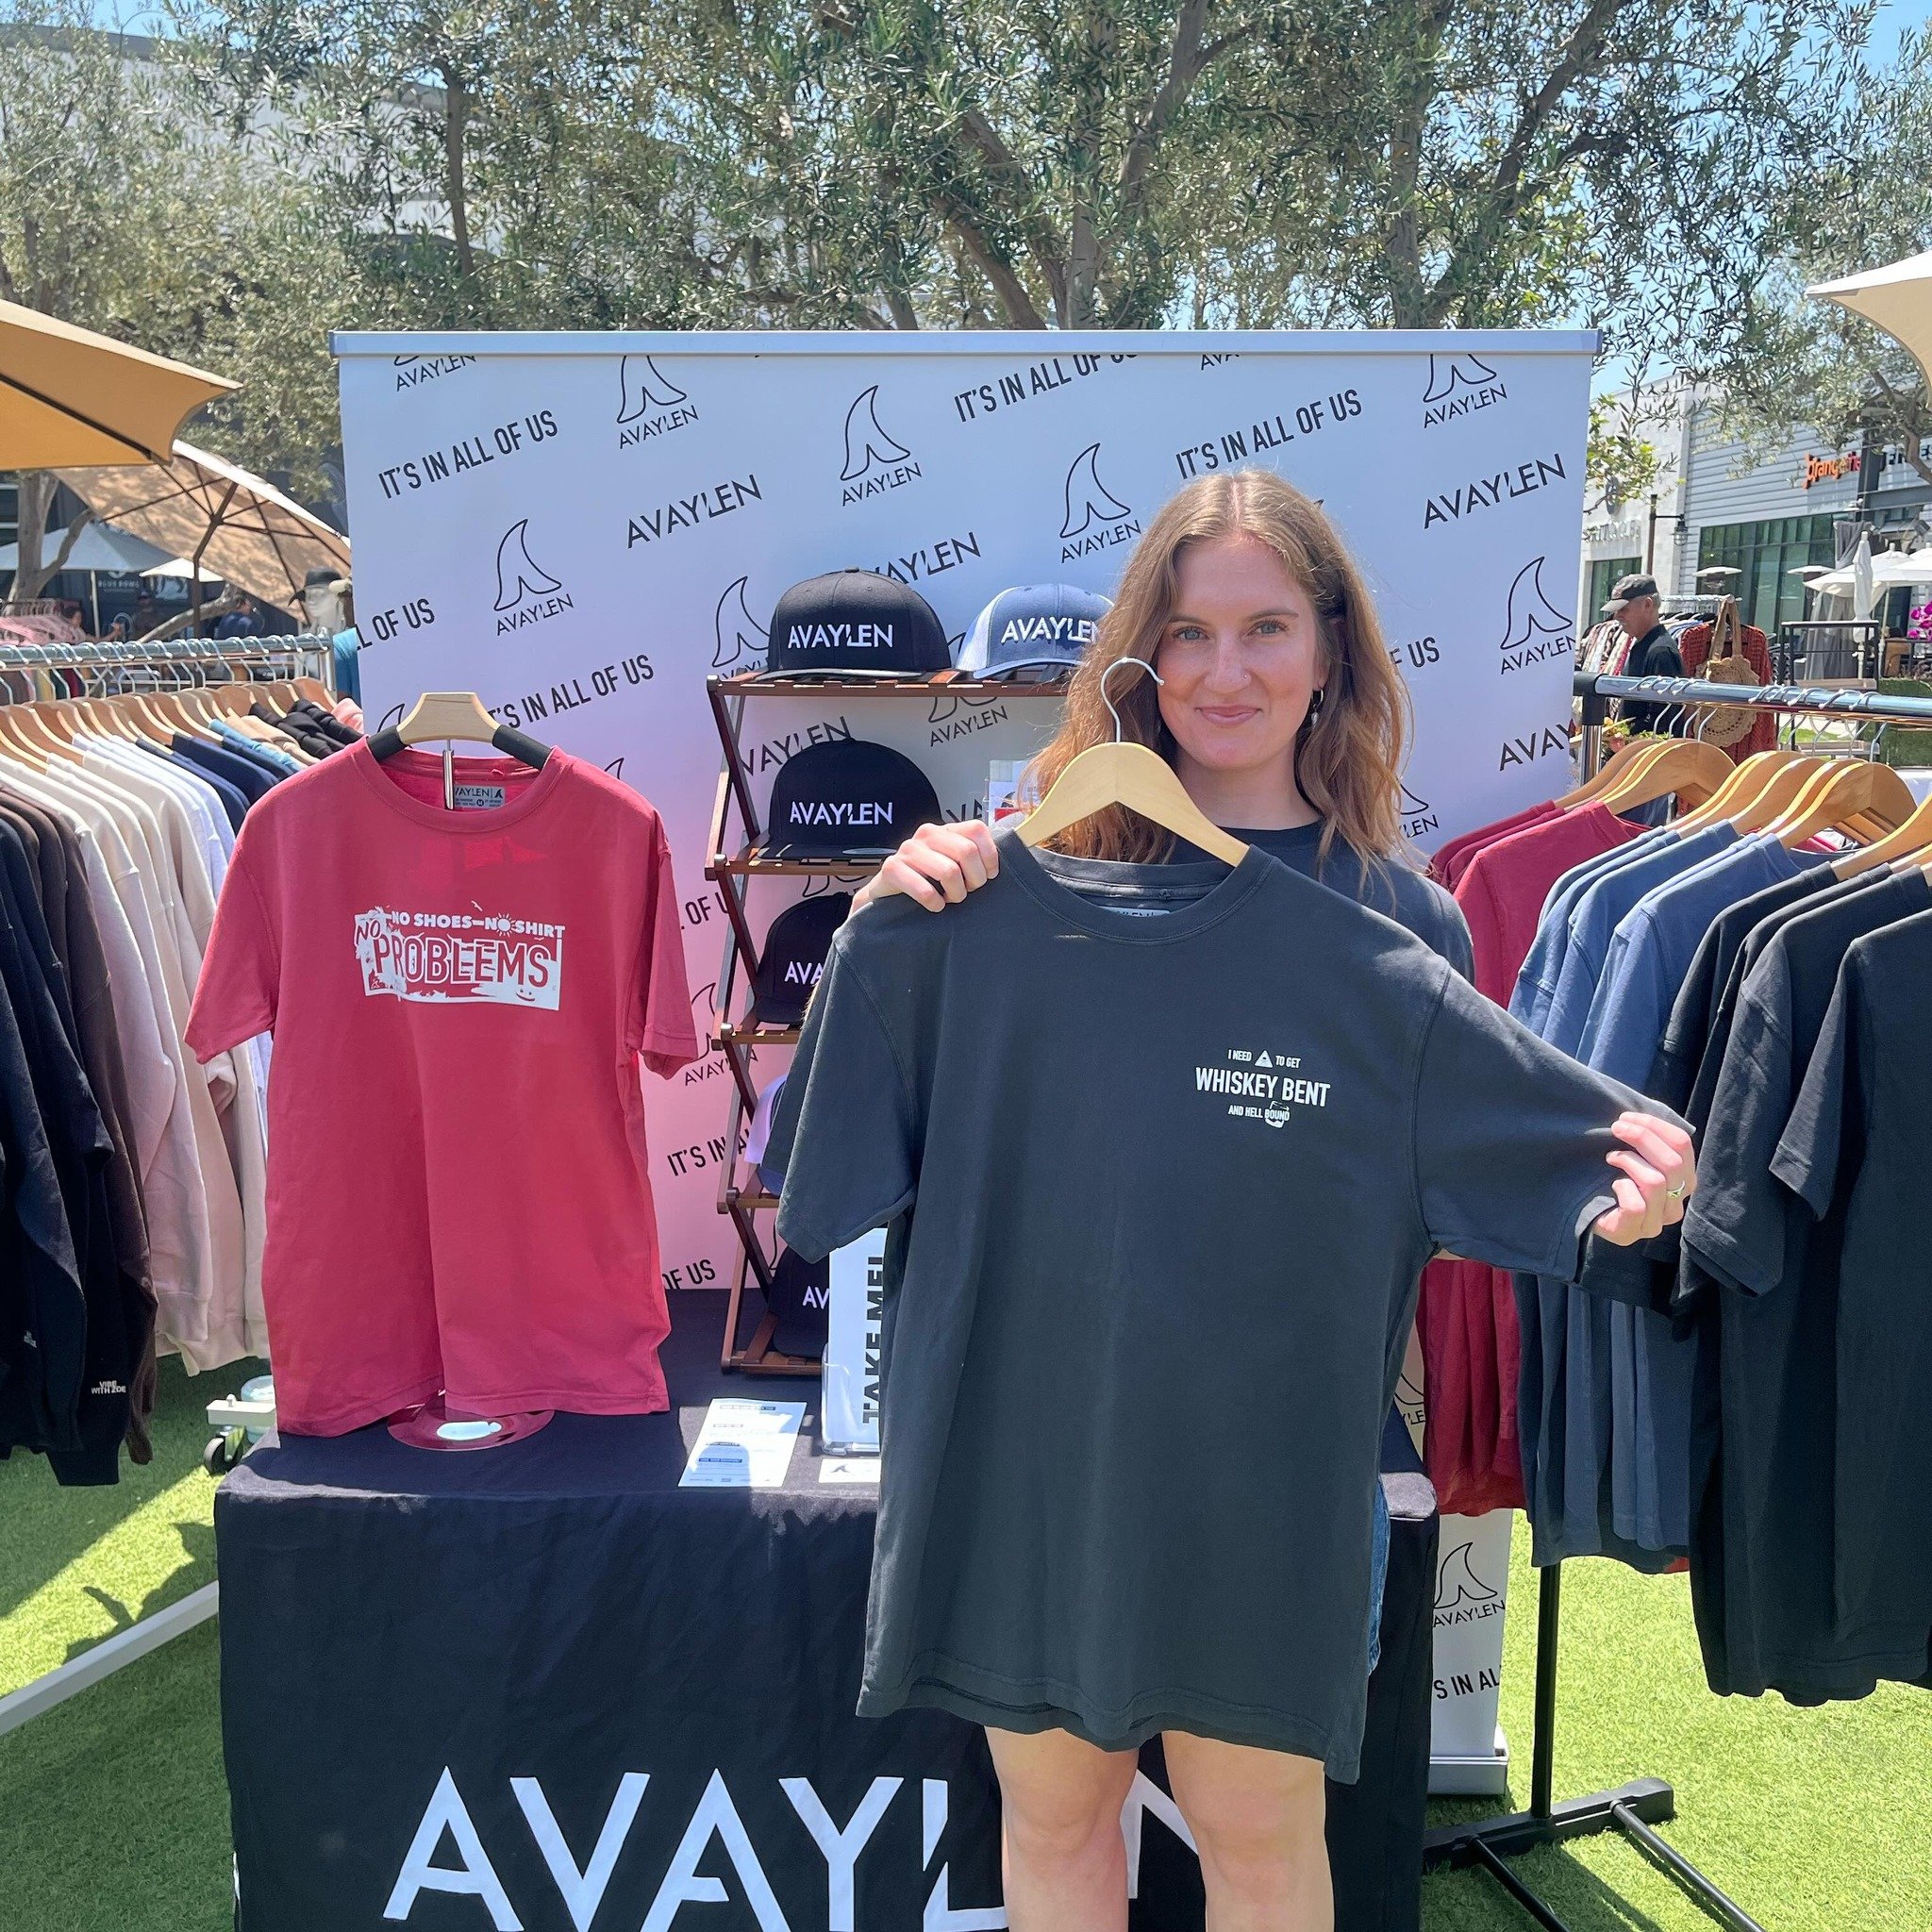 Big thanks to the friends, family, and strangers that stopped on by the Avaylen booth at the @the714market! -Anthony 
.
.
.
#avaylen #teamavaylen #avaylendesigns #art #design #countrylyrics #lyrics #countryradio #radio #countrymusic #anthonyavaylen #